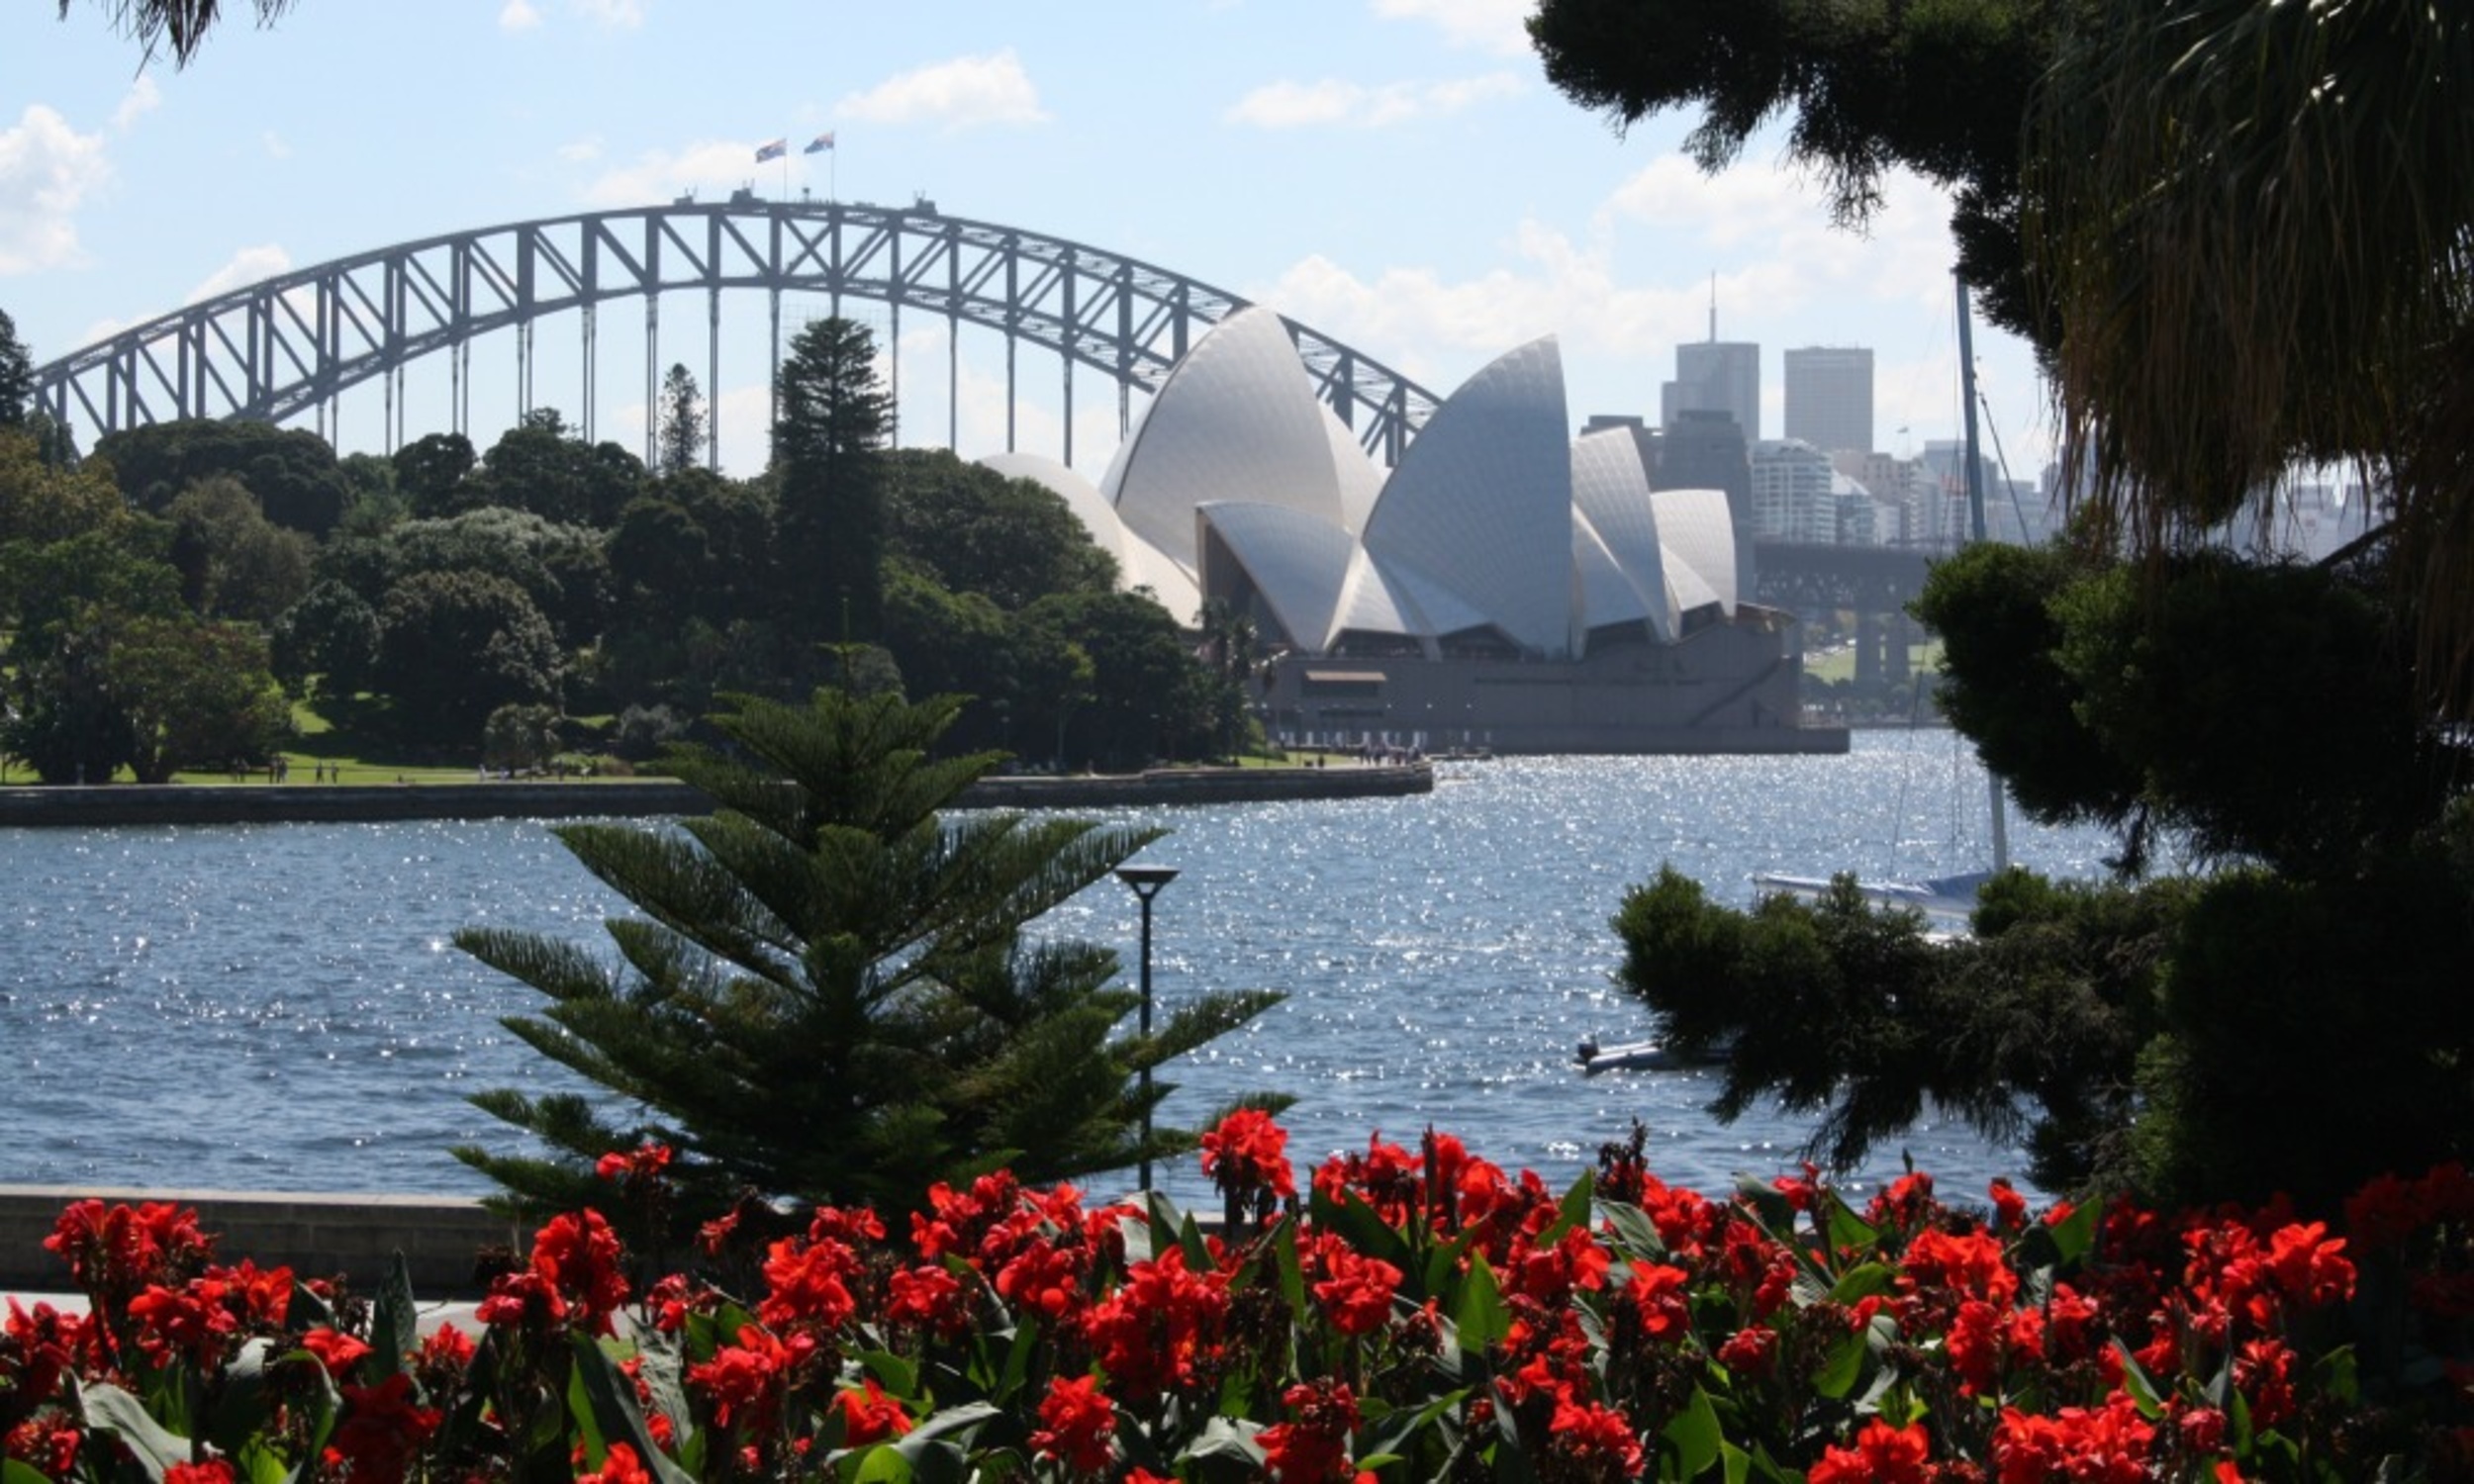 <p>What to see after the Opera House? Take a short walk to the Botanical Gardens, where you can see an array of colorful flowers and lush foliage, or sunbathe on a lawn overlooking the bridge.</p><p>You may also like: <a href='https://www.yardbarker.com/lifestyle/articles/bookmark_these_19_incredibly_useful_websites/s1__39903285'>Bookmark these 19 incredibly useful websites</a></p>